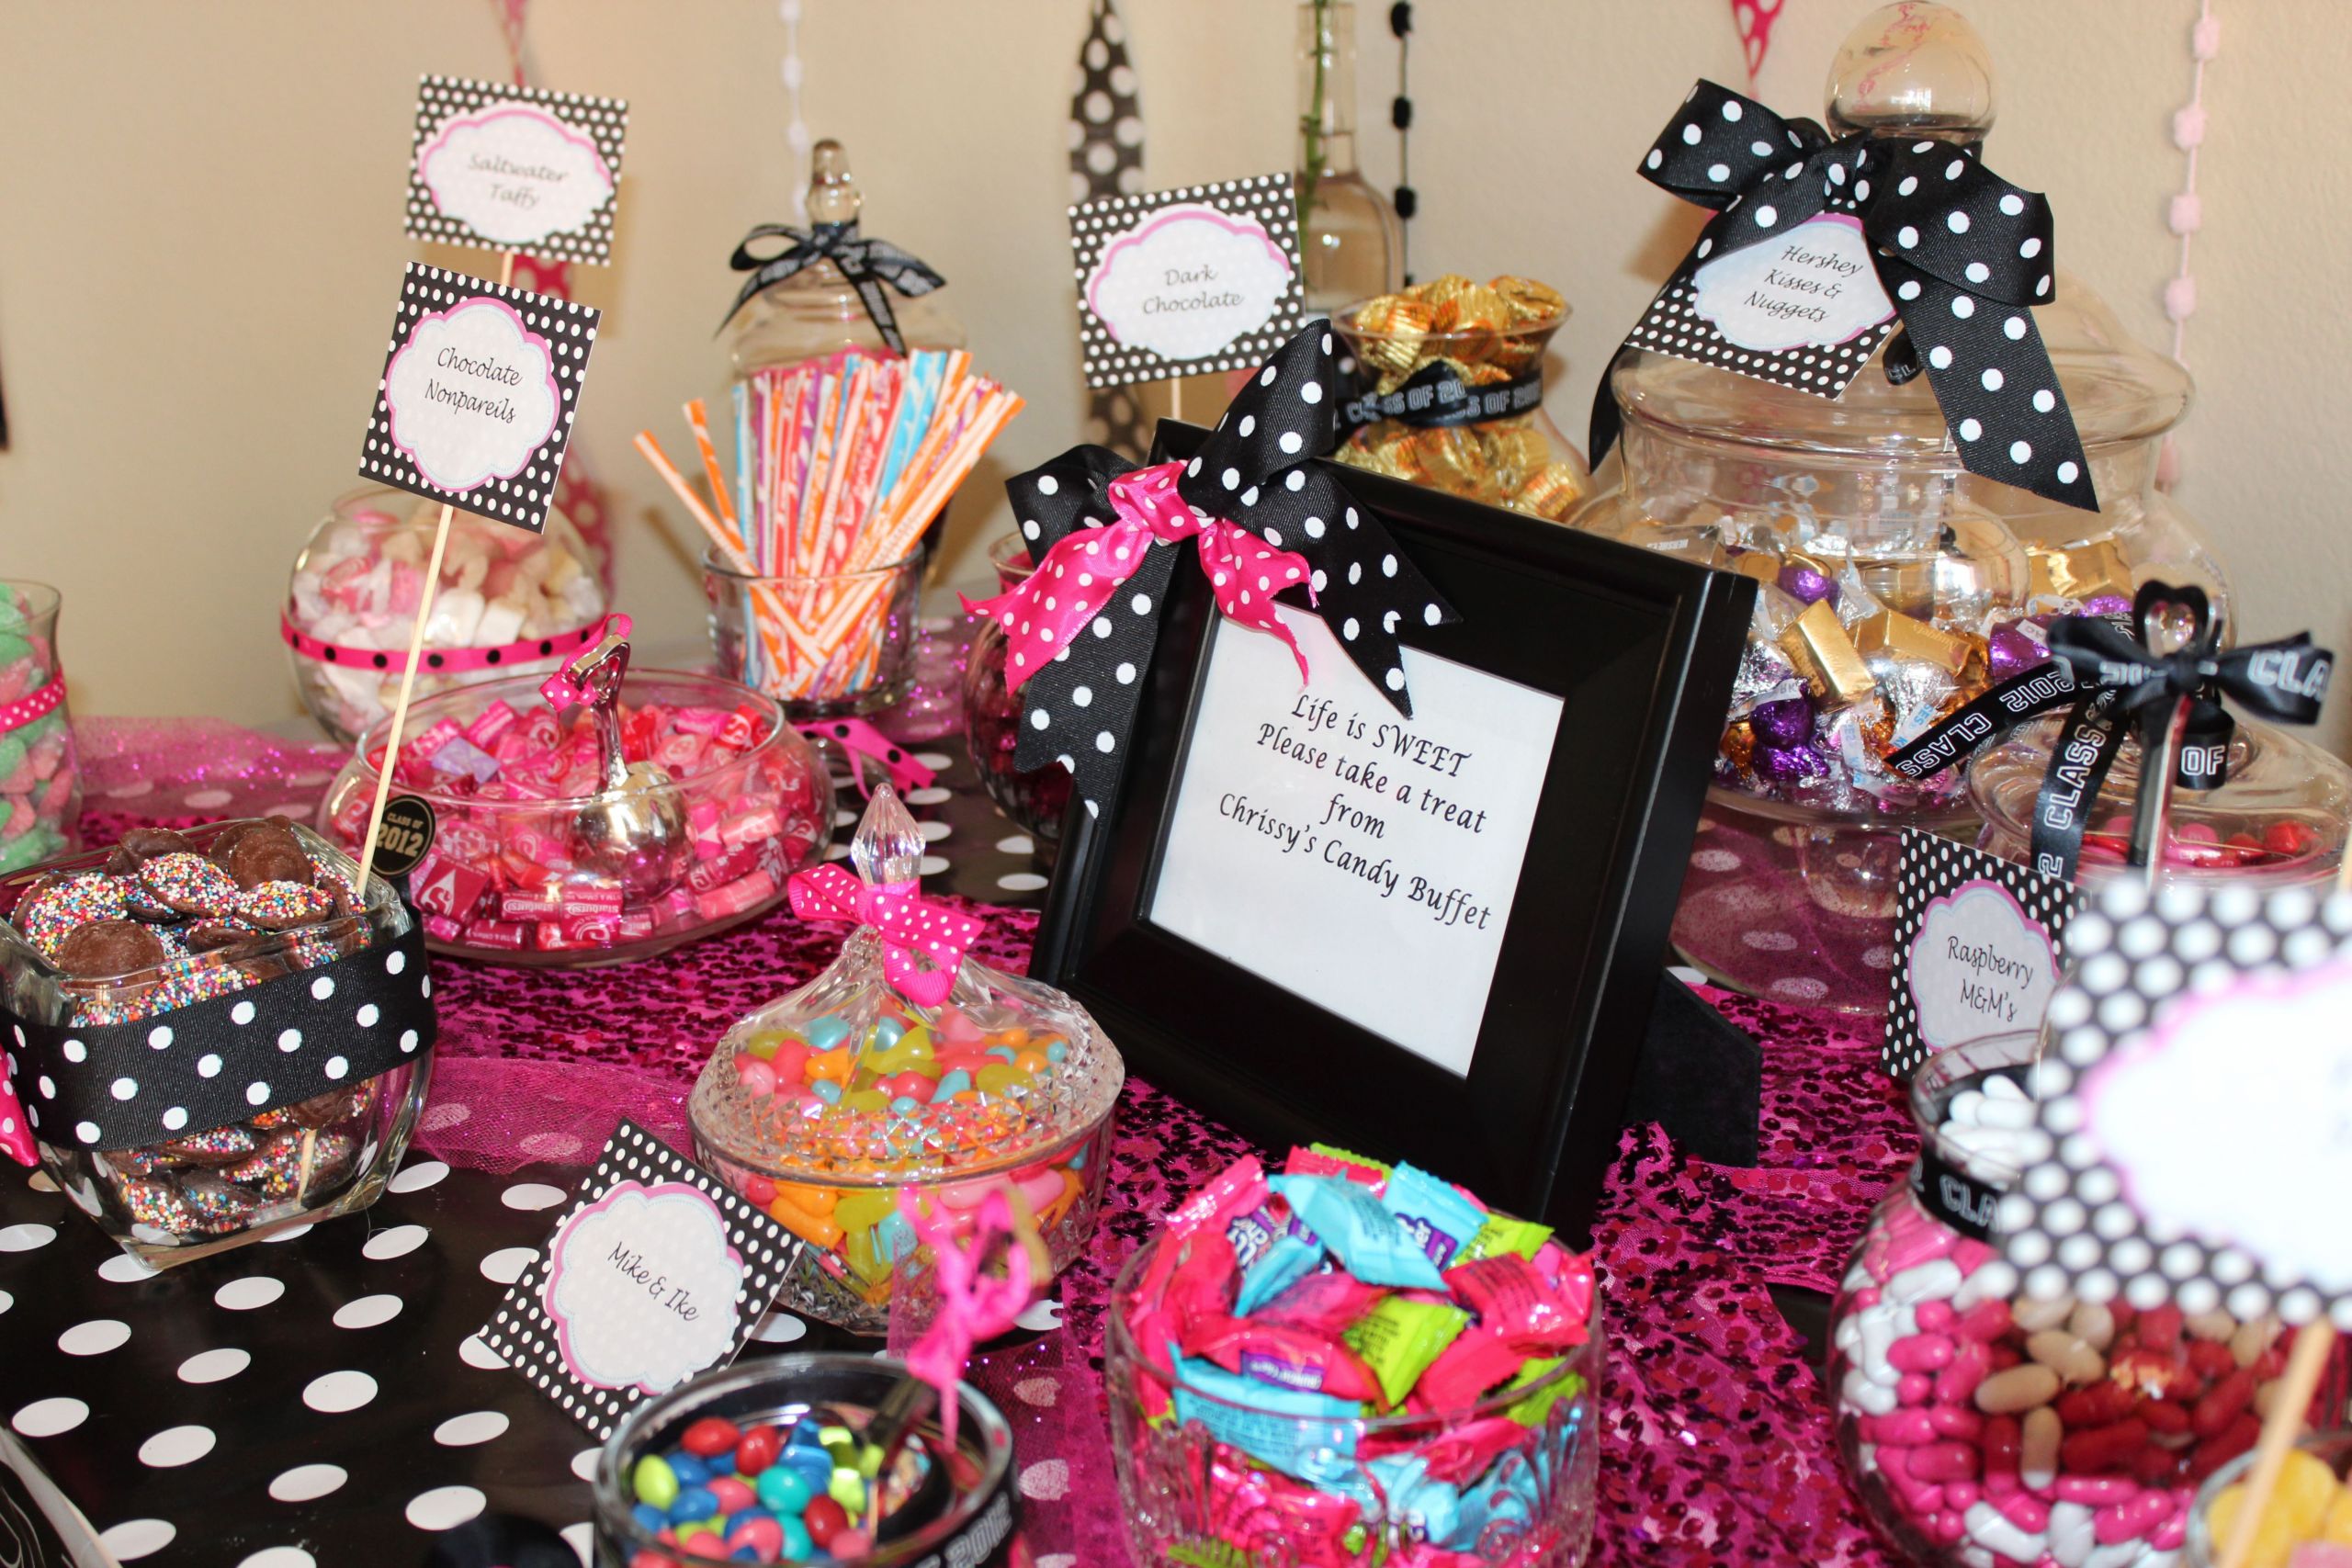 Candy Buffet Ideas For Graduation Party
 More graduation candy buffet